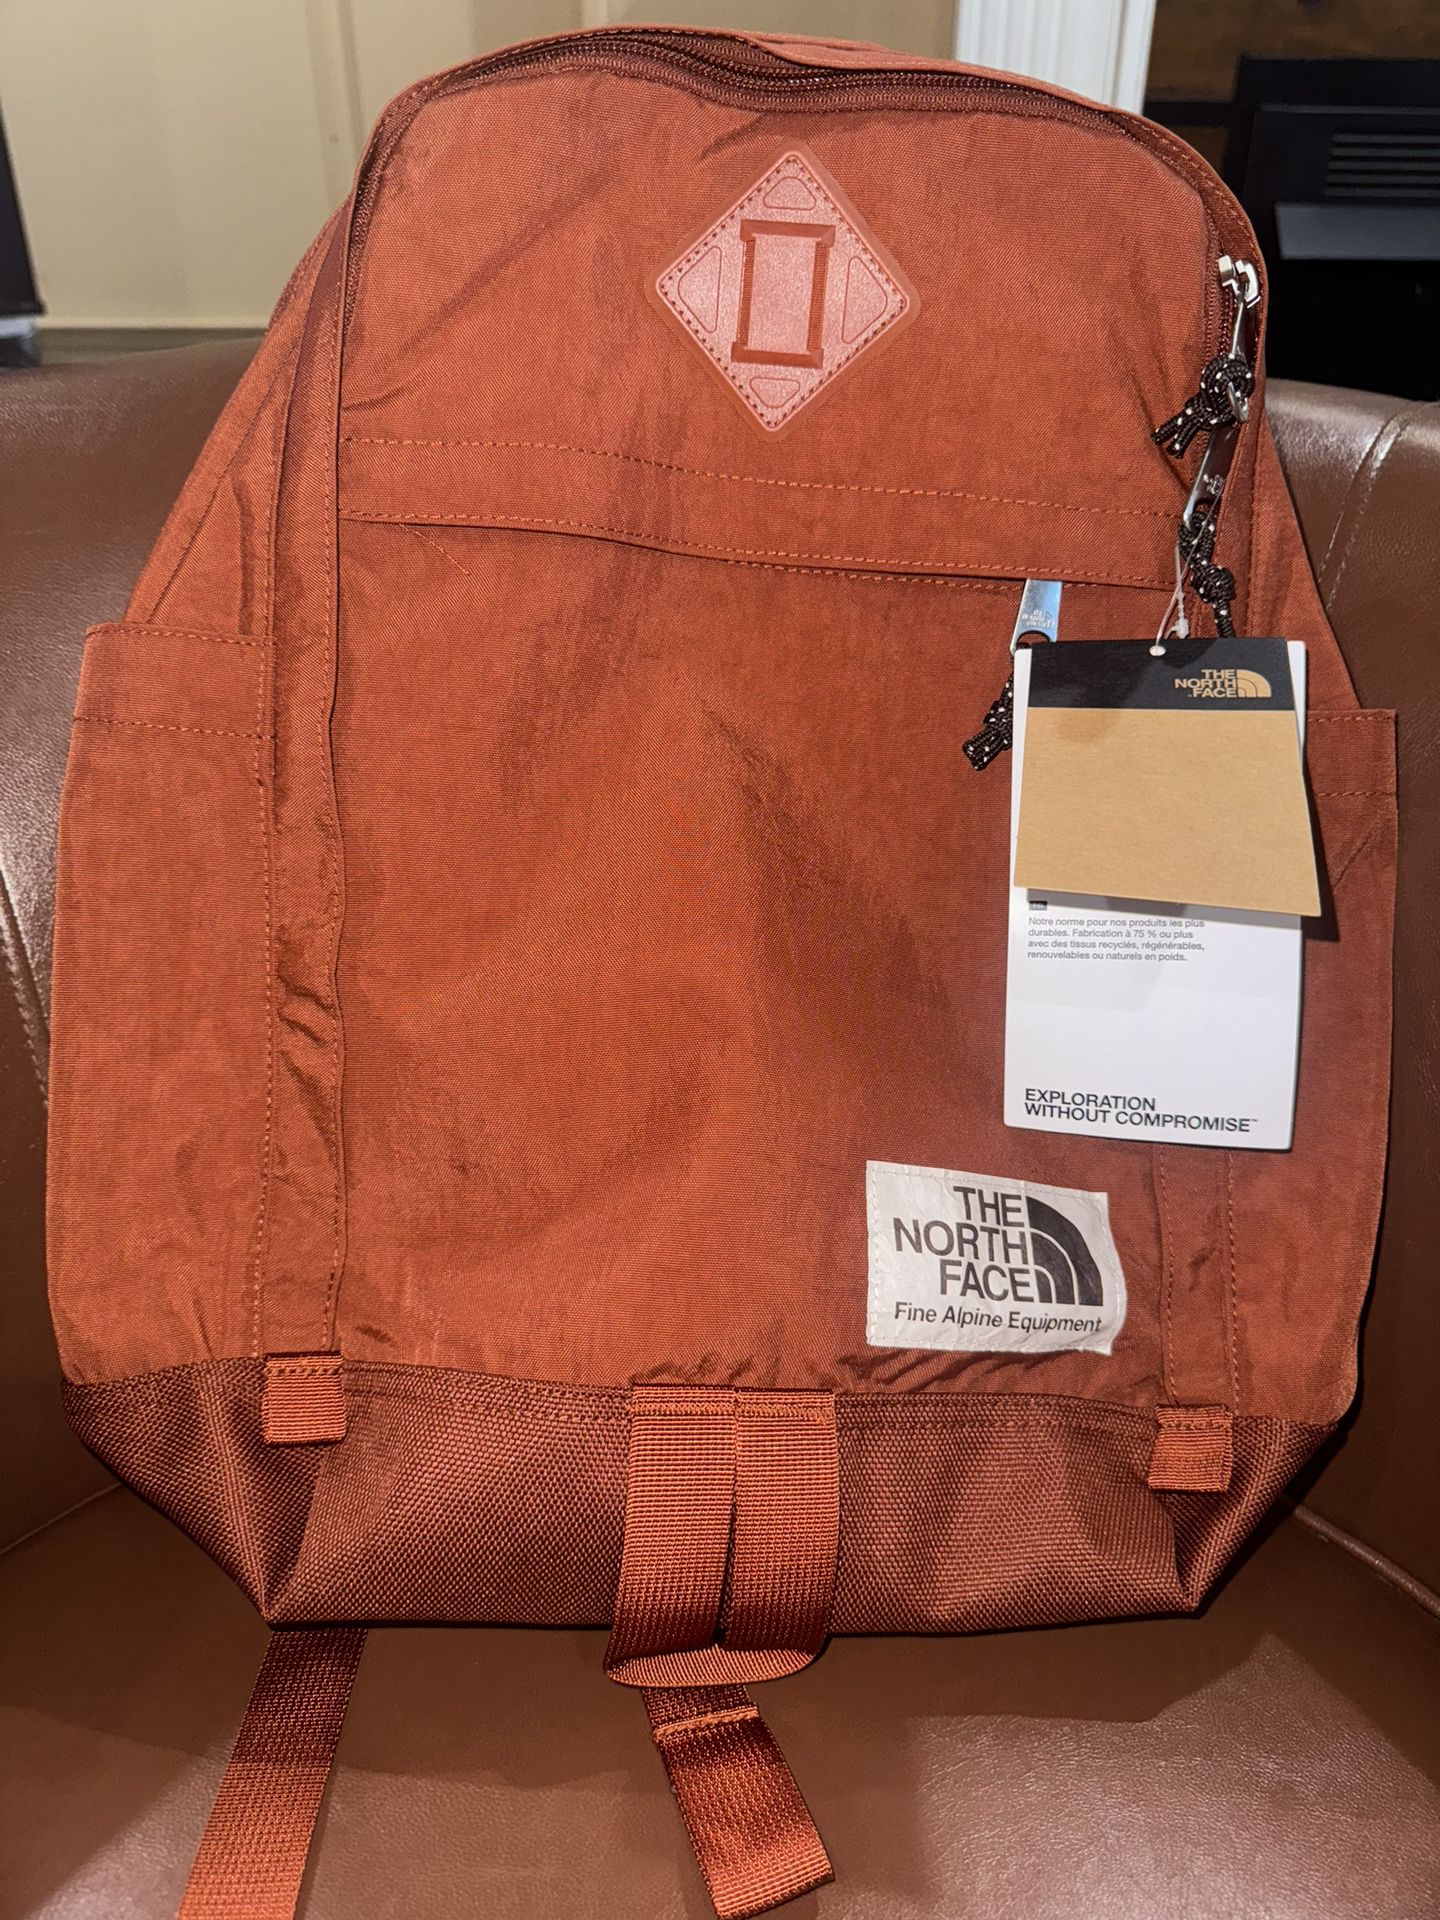 NWT The North Face Berkeley Daypack